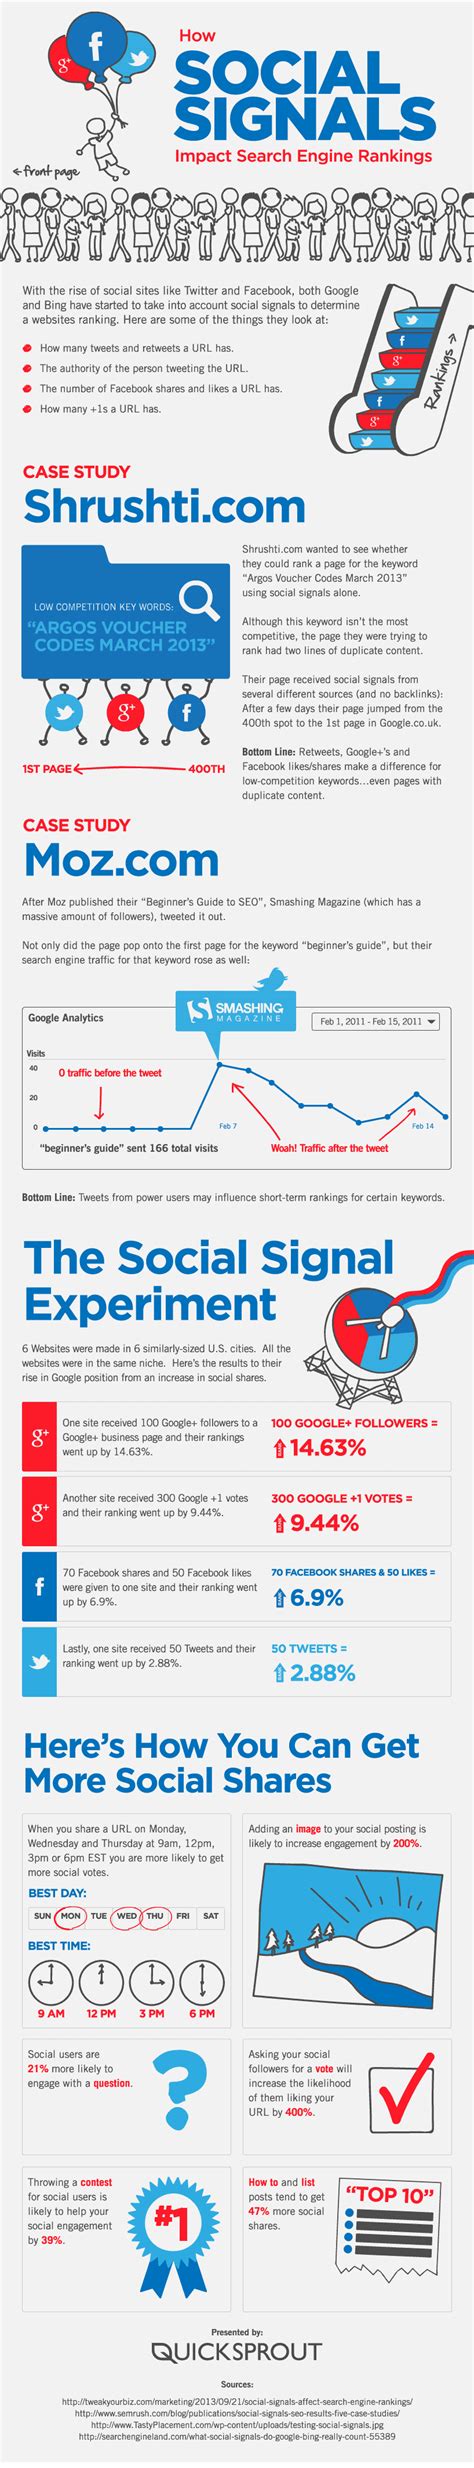 social media influence search rankings infographic business